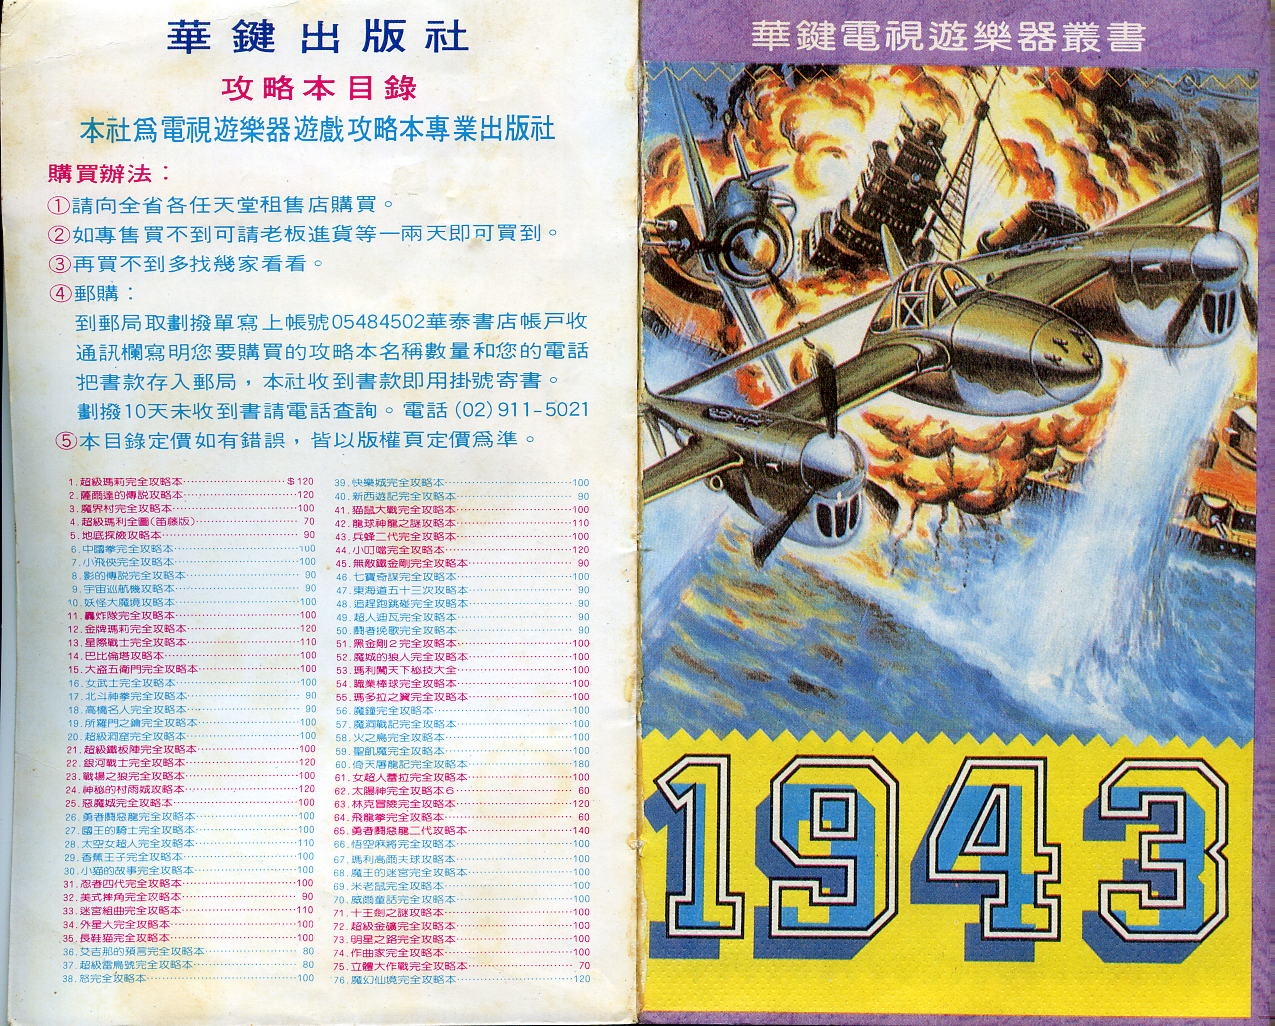 1943 The Battle of Midway Official guide (pirate version in Taiwan) 1